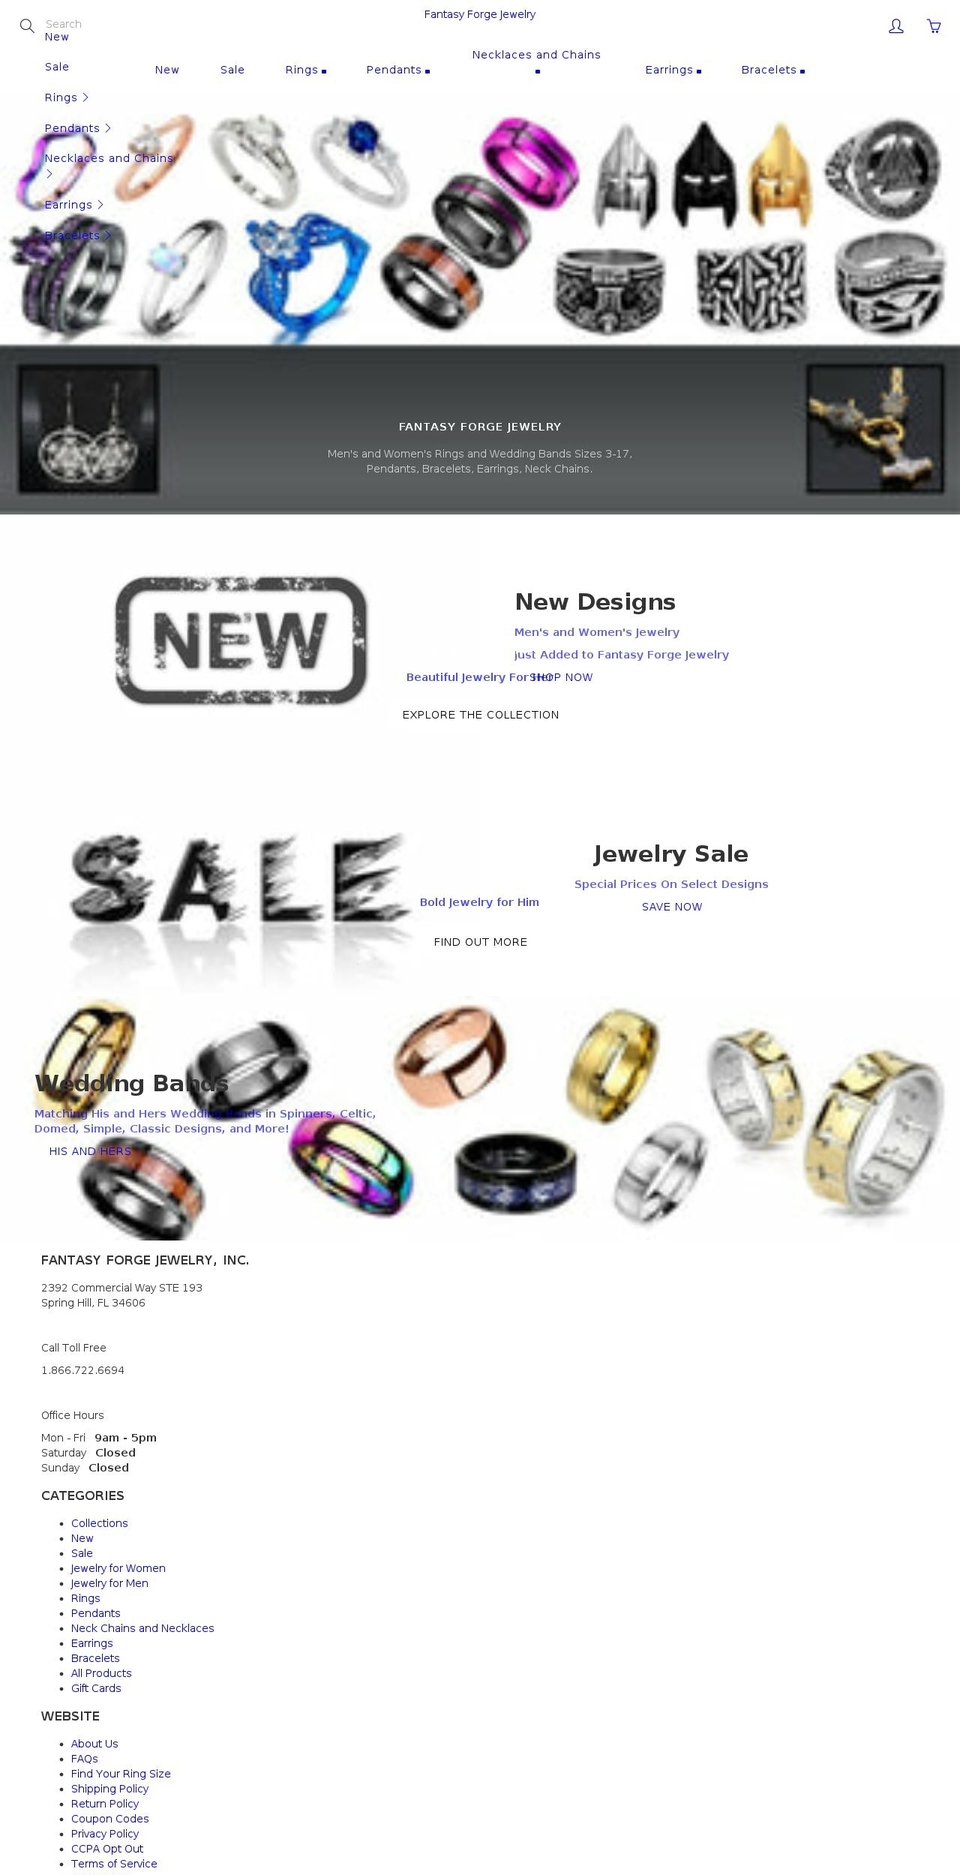 Forge Shopify theme site example fantasyforgejewelry.com